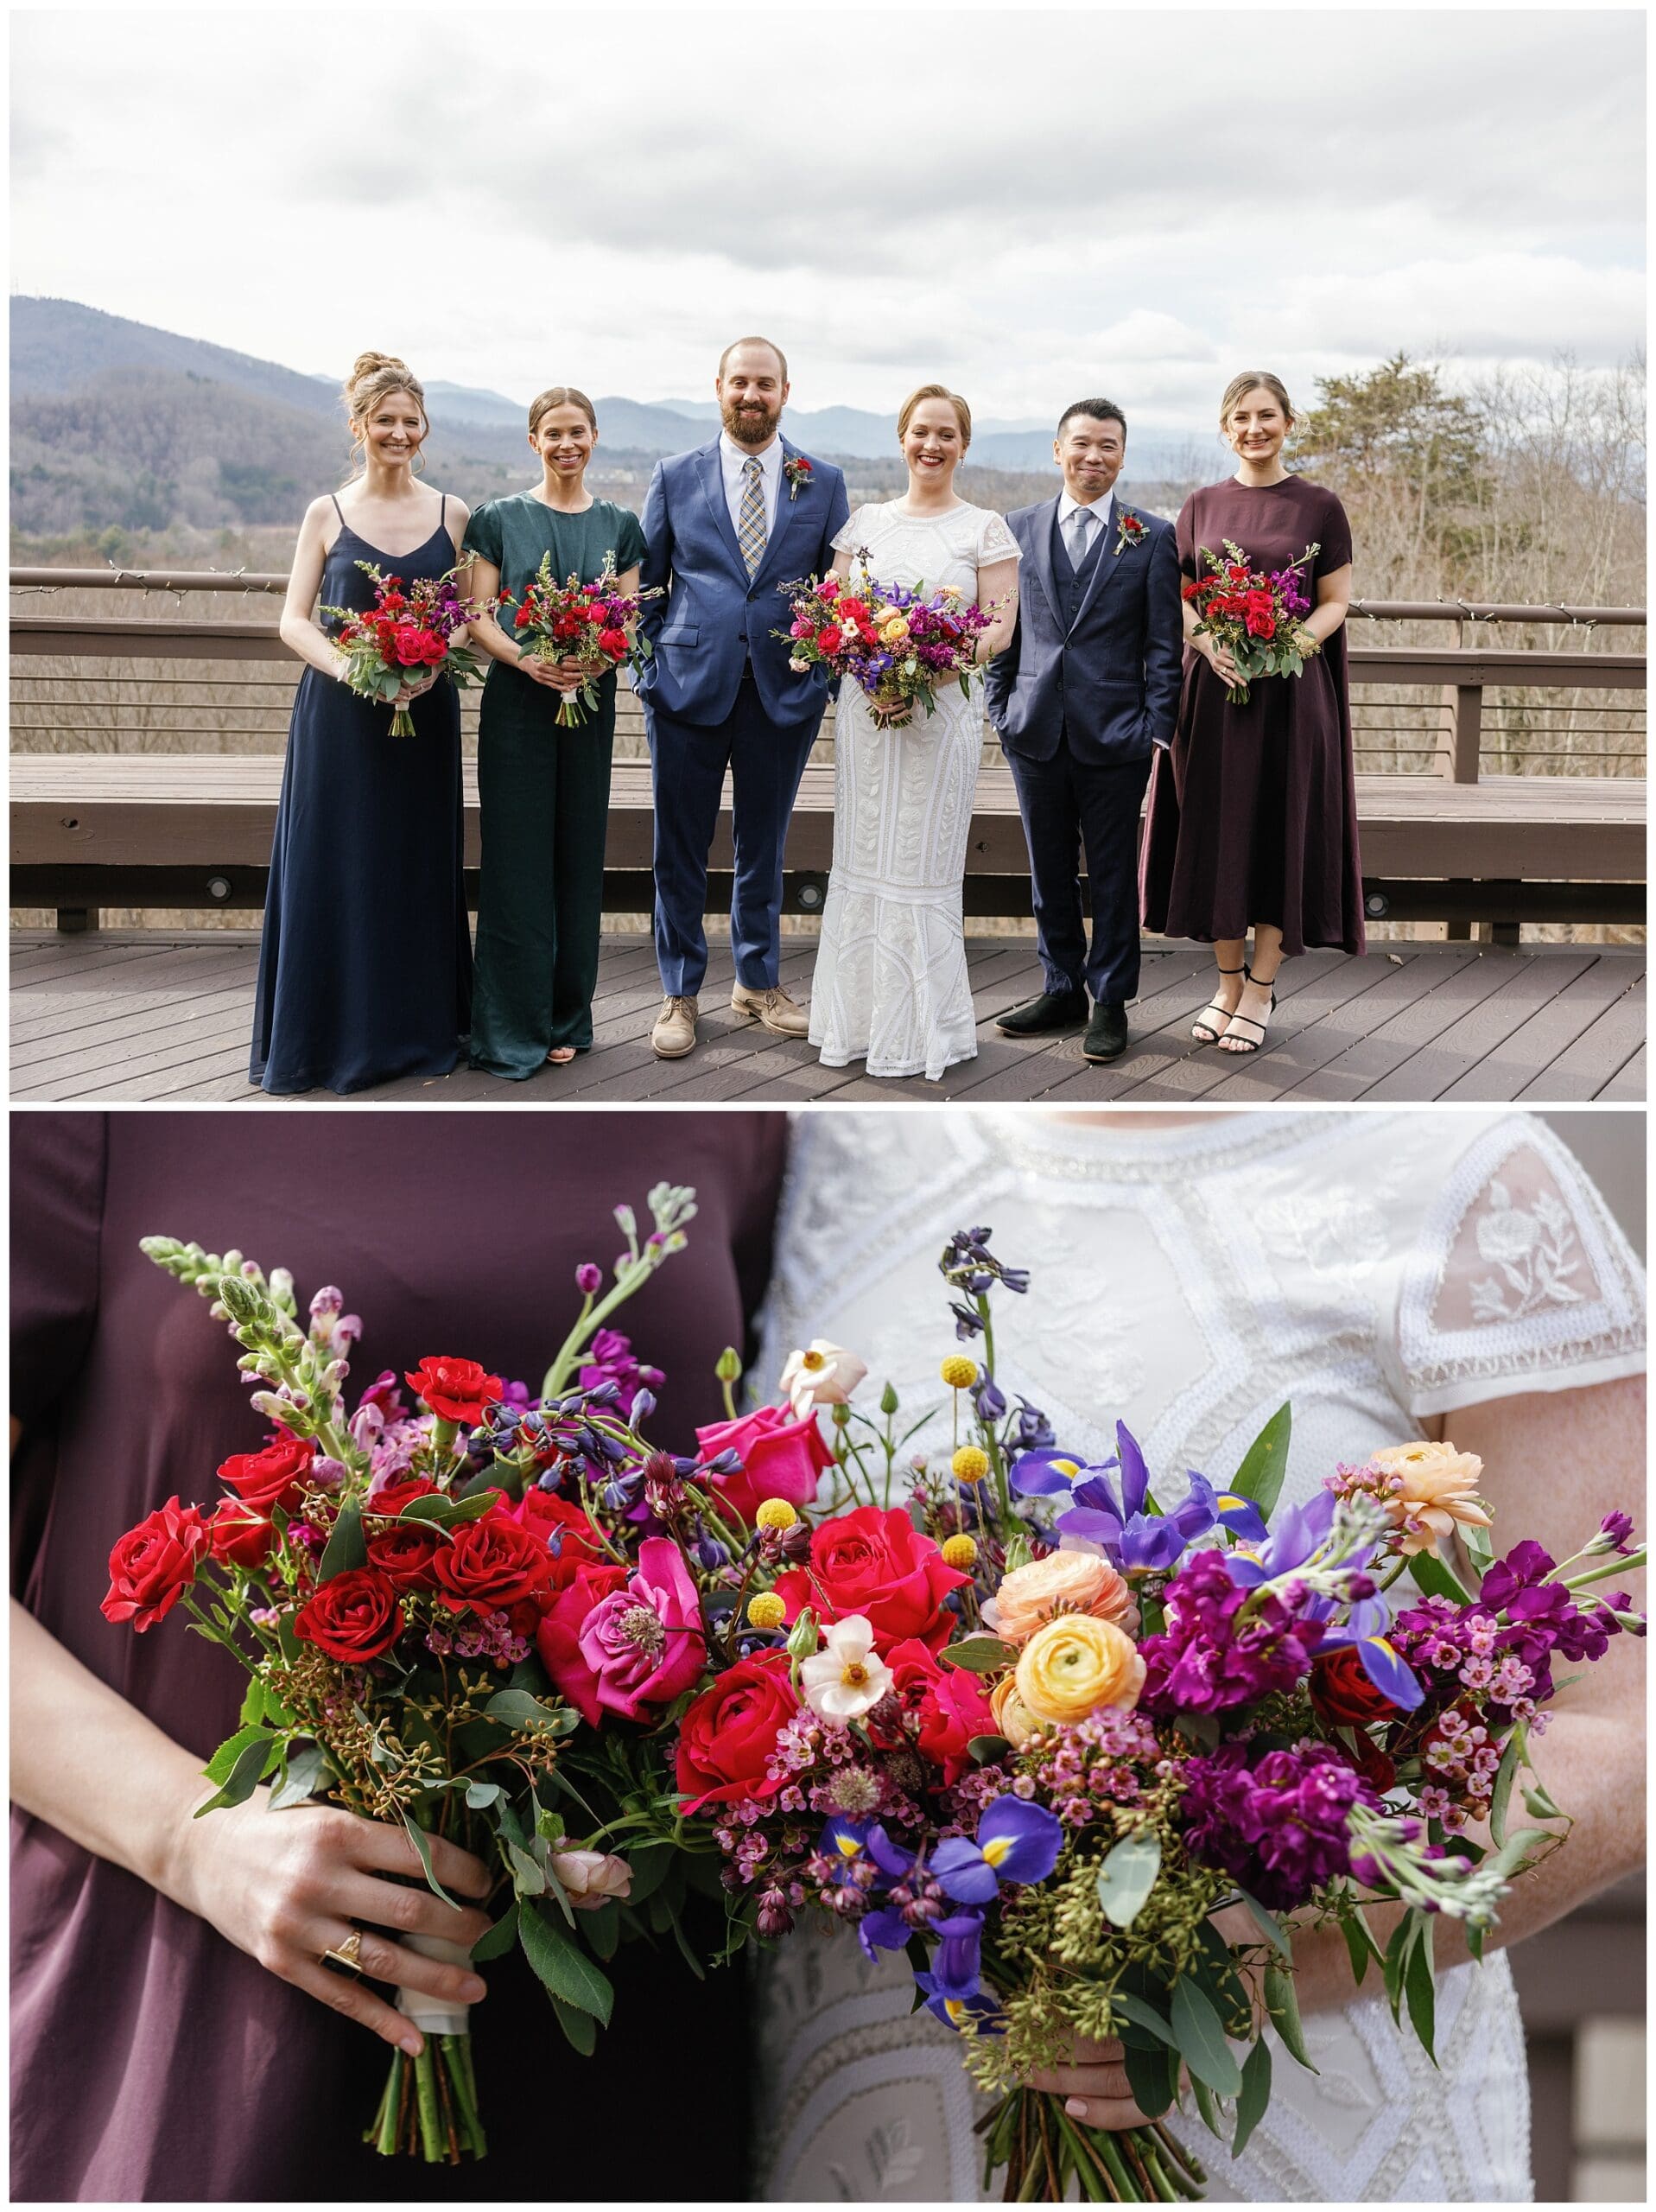 A group of bridesmaids and groomsmen with colorful bouquets.